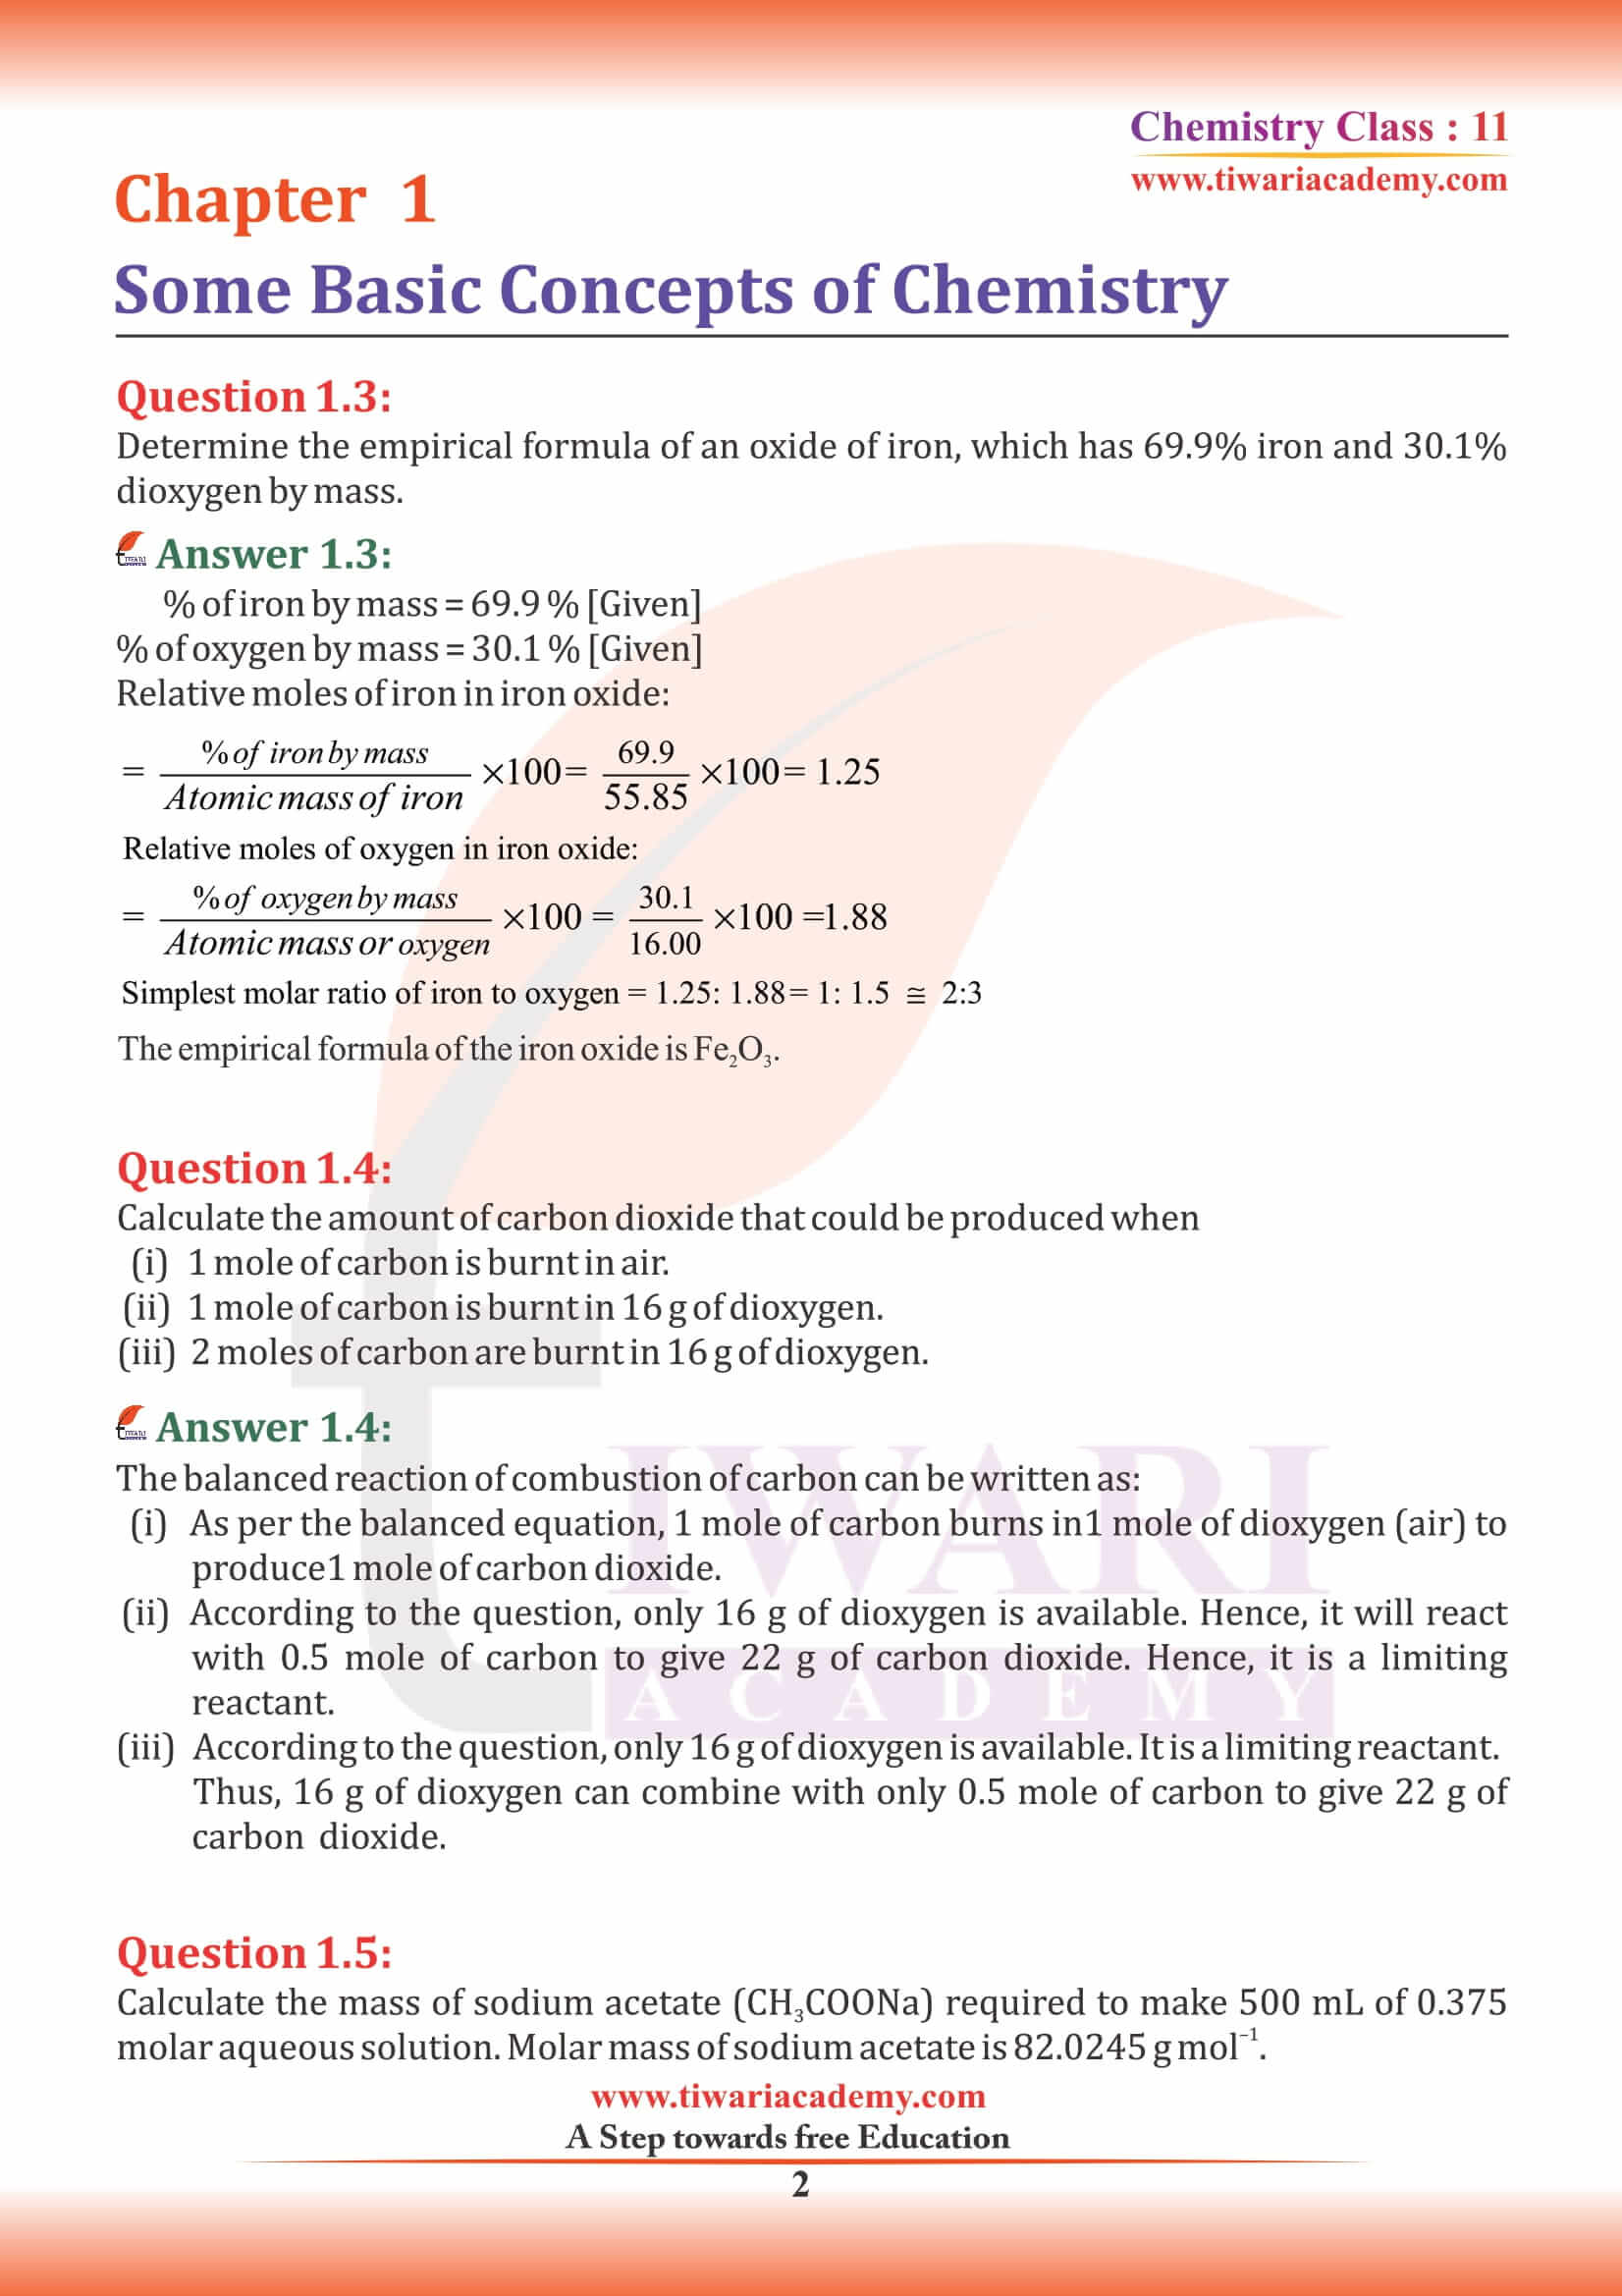 NCERT Solutions for Class 11 Chemistry Chapter 1 question 3 and 4